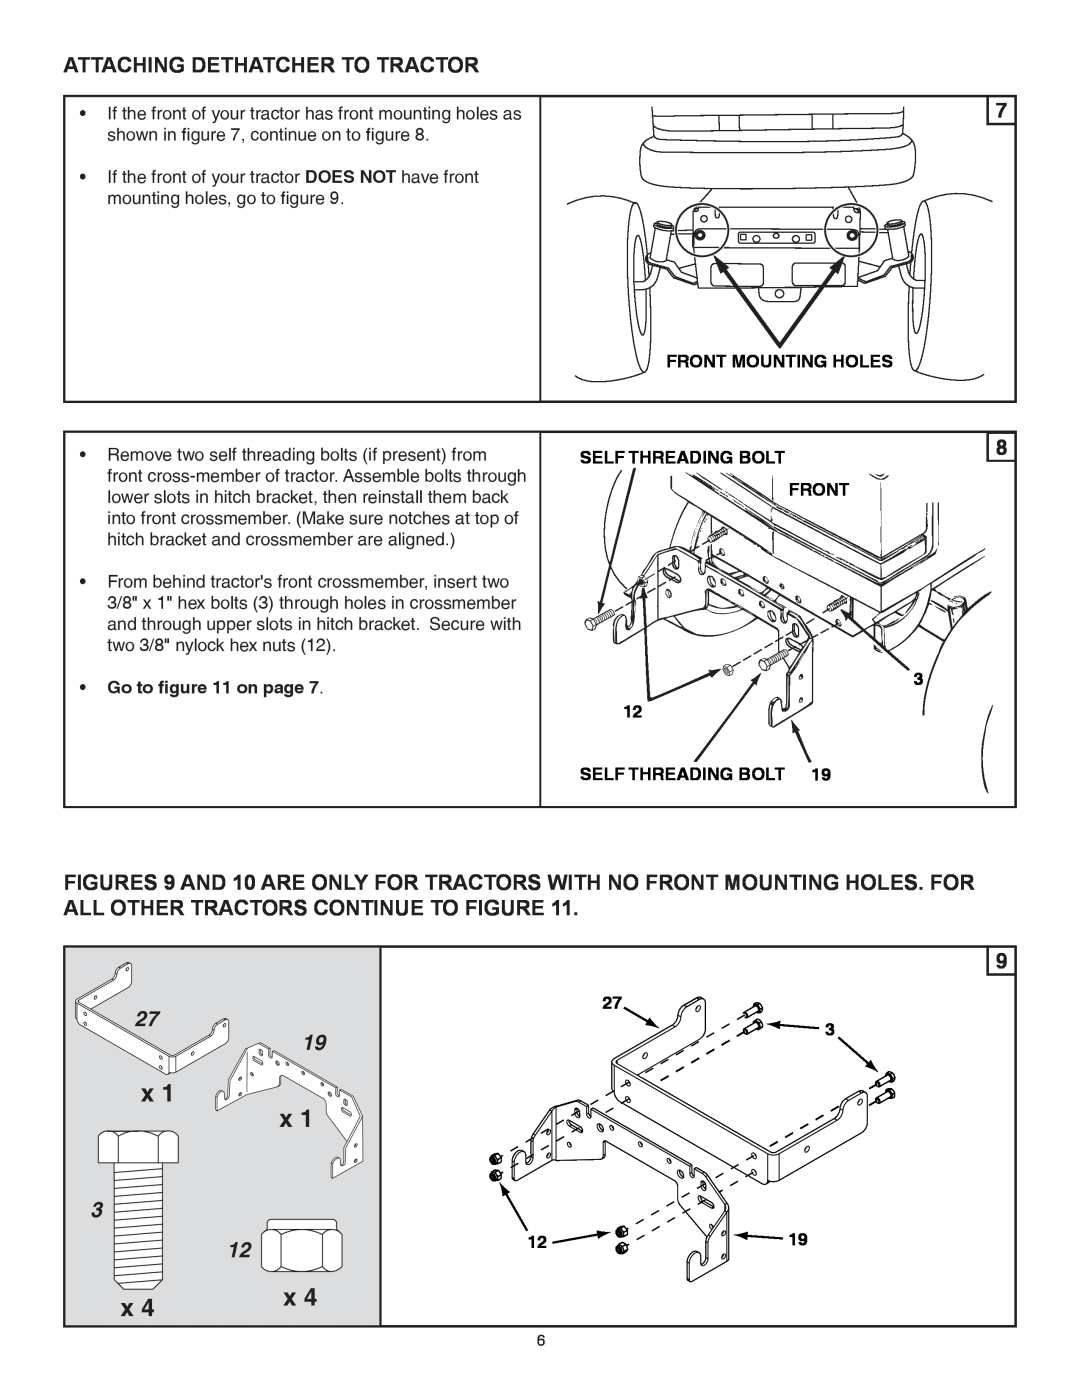 Sears 45-04381 owner manual Attaching Dethatcher To Tractor, Front Mounting Holes, Go to on page, Self Threading Bolt Front 